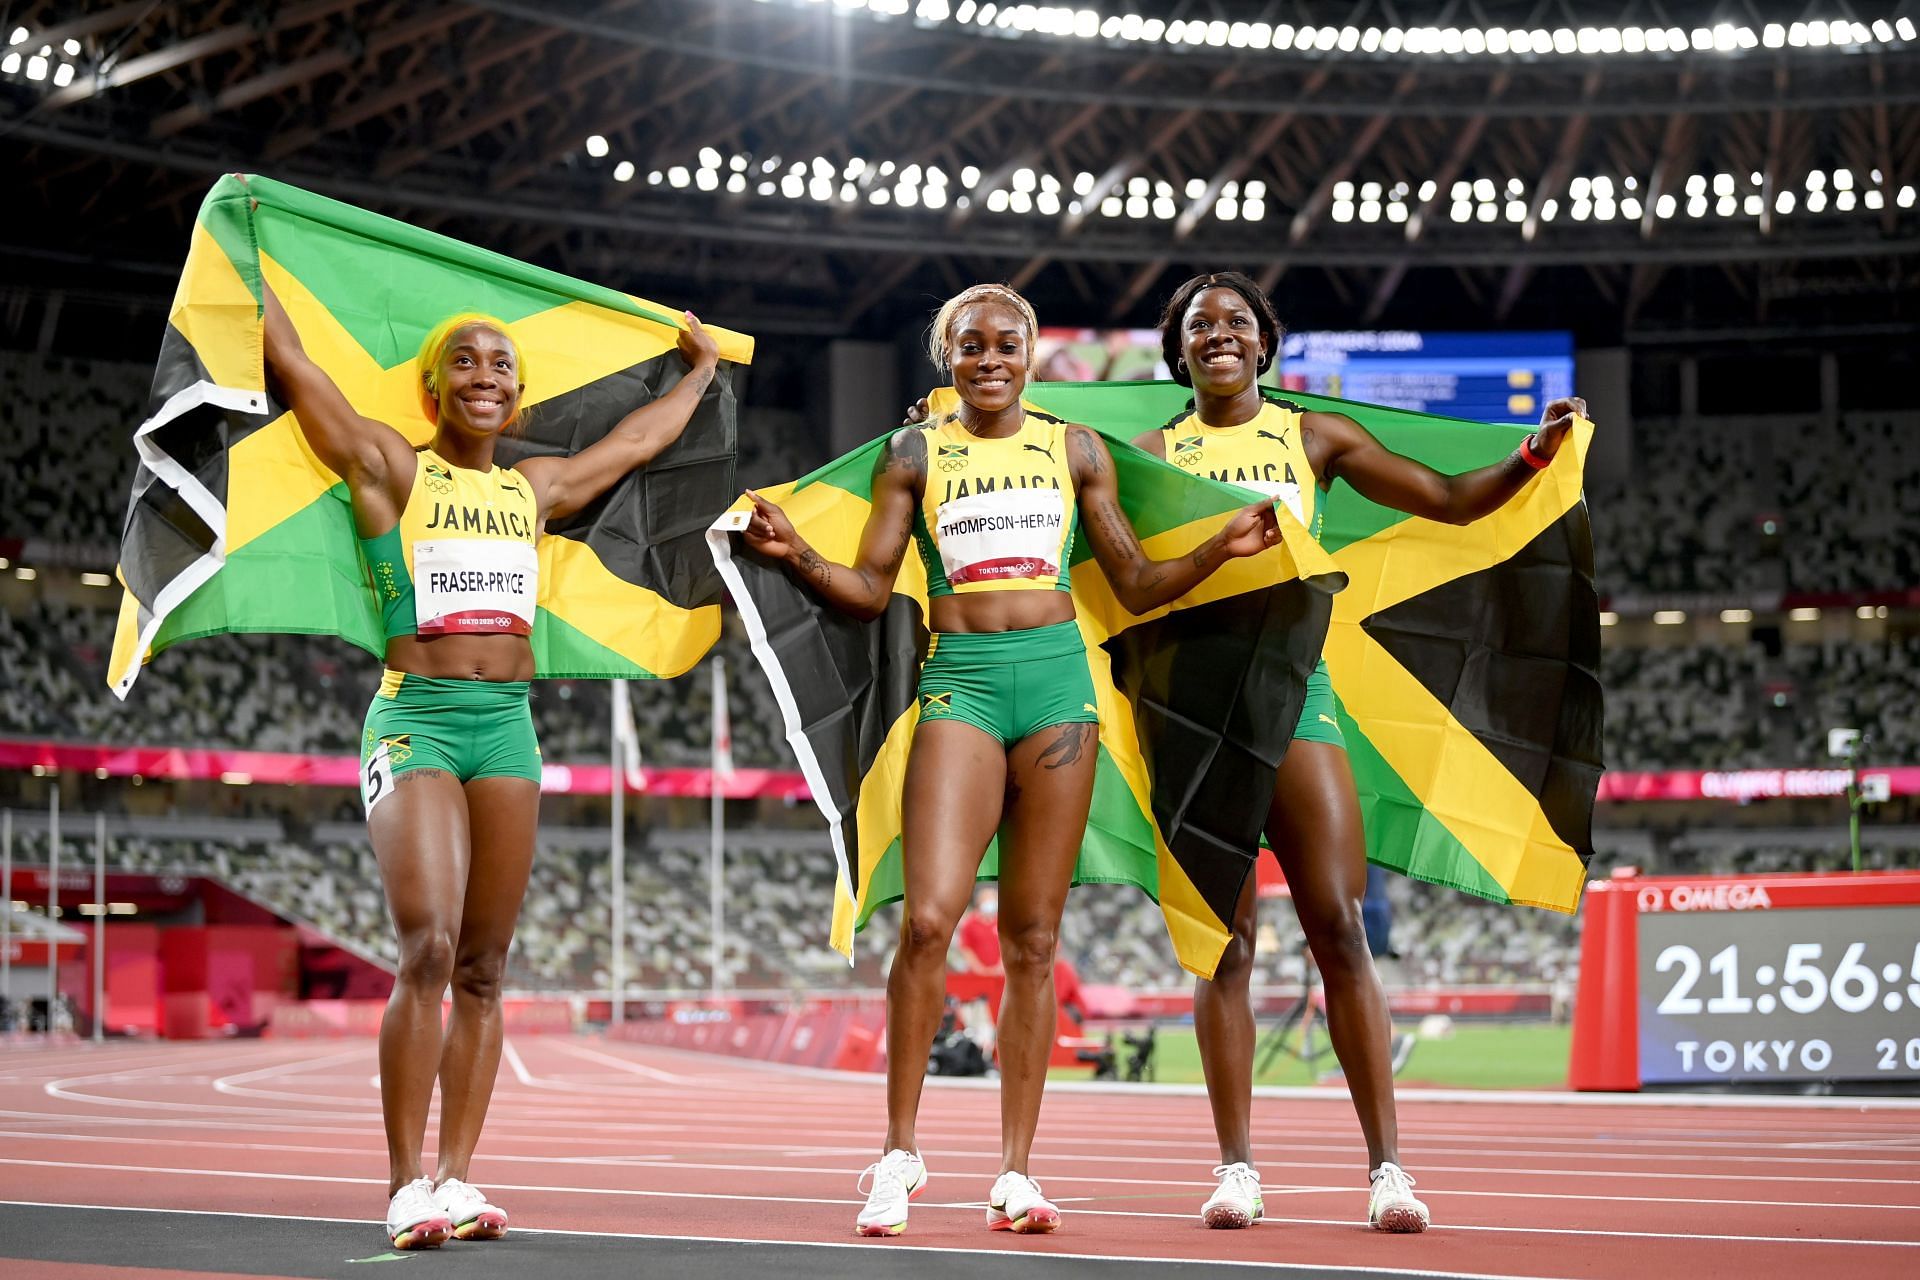 Shelly-Ann Fraser-Pryce, Elaine Thompson-Herah and Shericka Jackson of Team Jamaica celebrate after completing a podium sweep in the Women&#039;s 100m Final on day eight of the Tokyo 2020 Olympics at Olympic Stadium on July 31, 2021 in Tokyo, Japan. (Photo by Matthias Hangst/Getty Images)